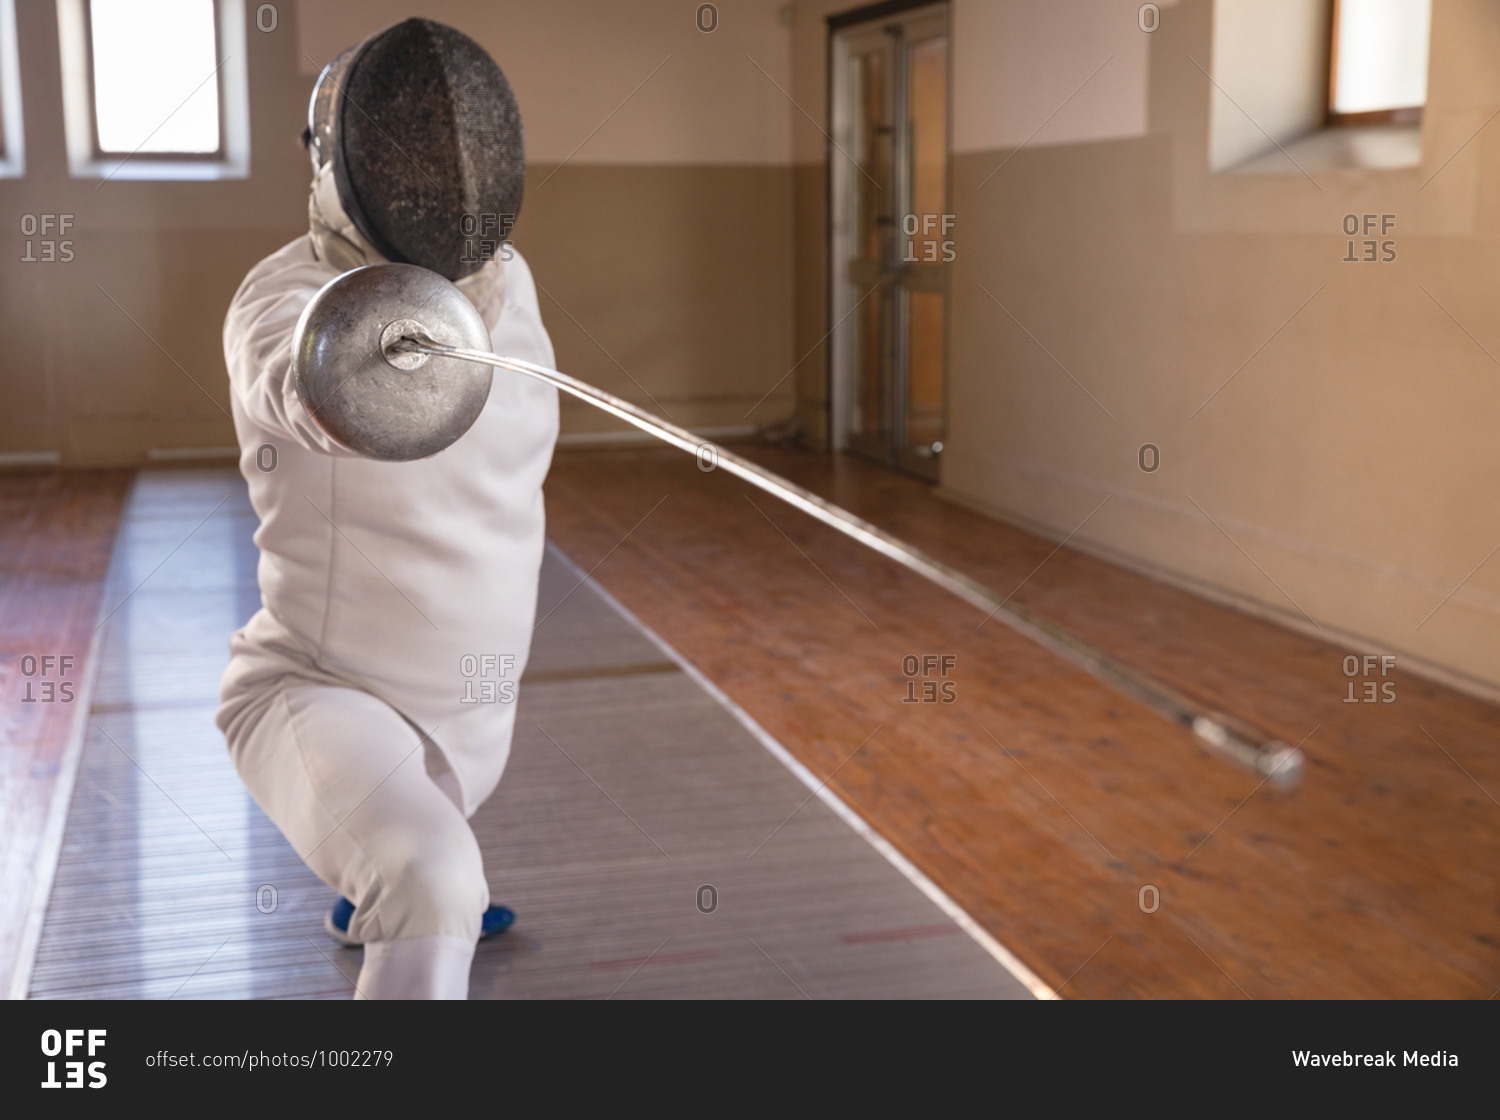 Caucasian sportsman wearing protective fencing outfit during a fencing training session, preparing for a duel, holding an epee and lunging. Fencers training at a gym.